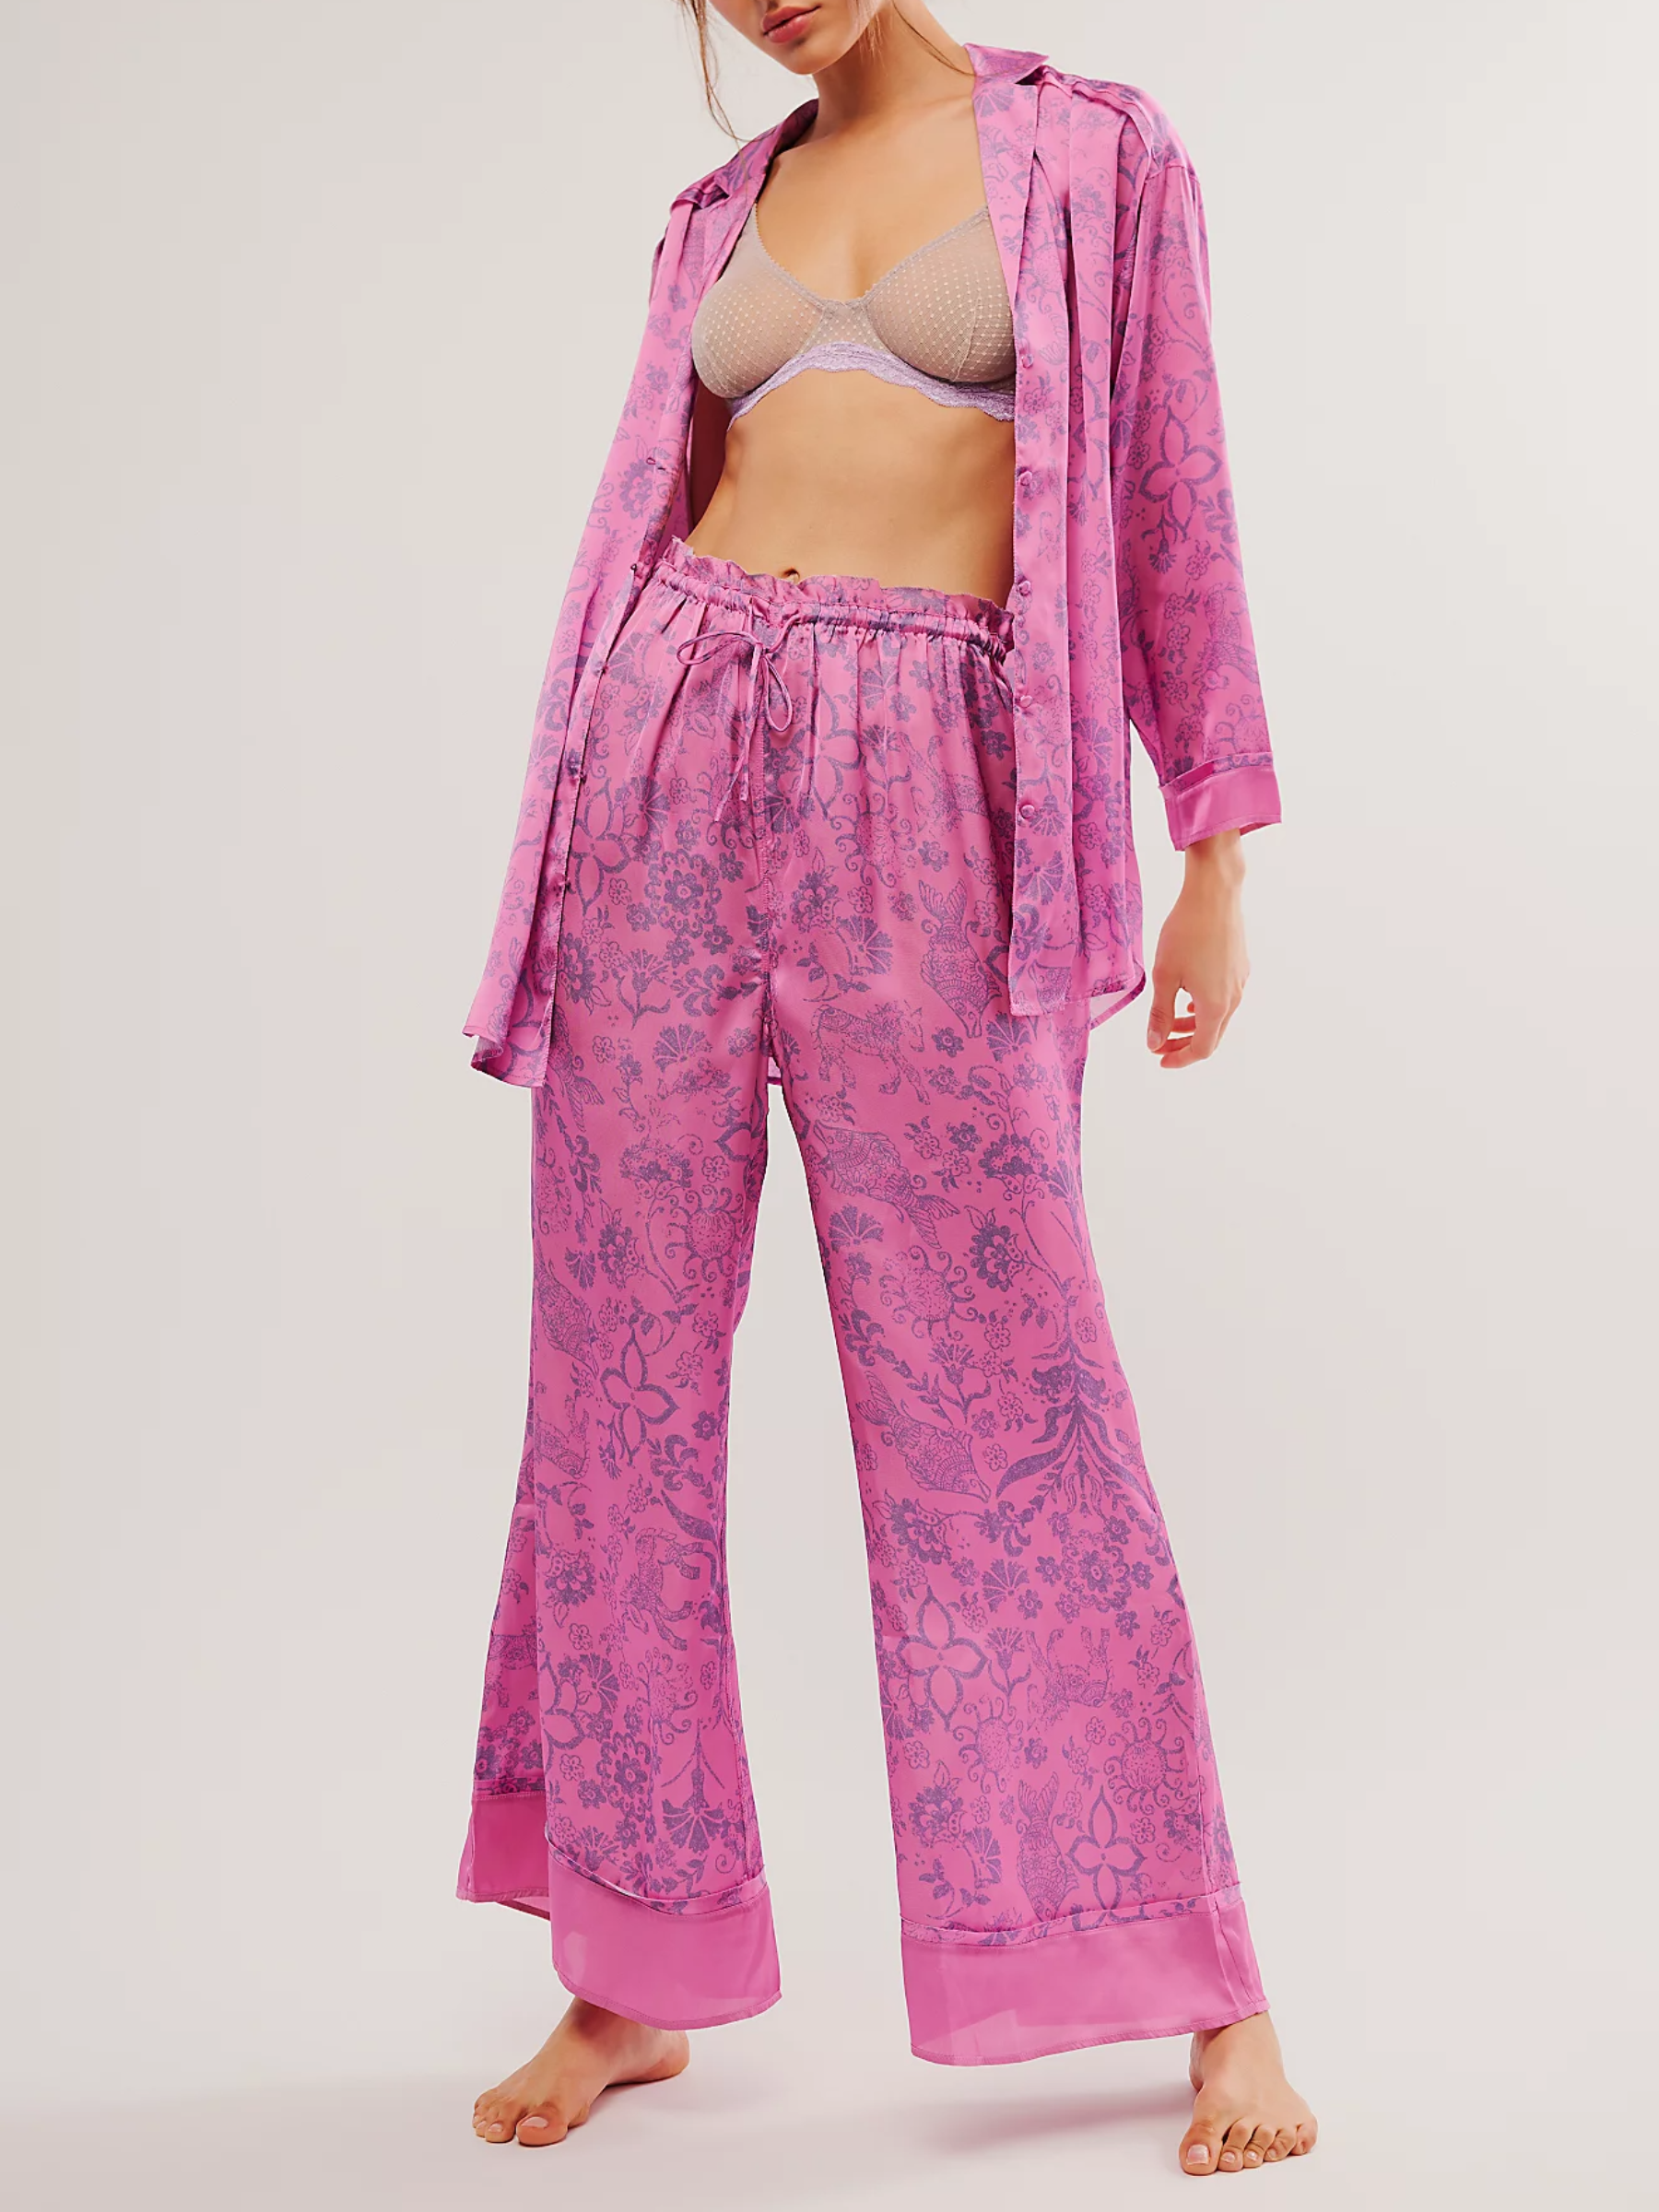 Speaking of sleepwear, everyone could use a set of fancy-ish pajamas. This silky set is breathable, has an oversized top and stretchy pants, and is ideal for hot sleepers. Even if they're not ones to slip into matching PJs every night, this makes for great loungewear. $98, Free People. <a href="https://www.freepeople.com/shop/dreamy-days-pajama-set/?">Get it now!</a><p>Sign up for today’s biggest stories, from pop culture to politics.</p><a href="https://www.glamour.com/newsletter/news?sourceCode=msnsend">Sign Up</a>